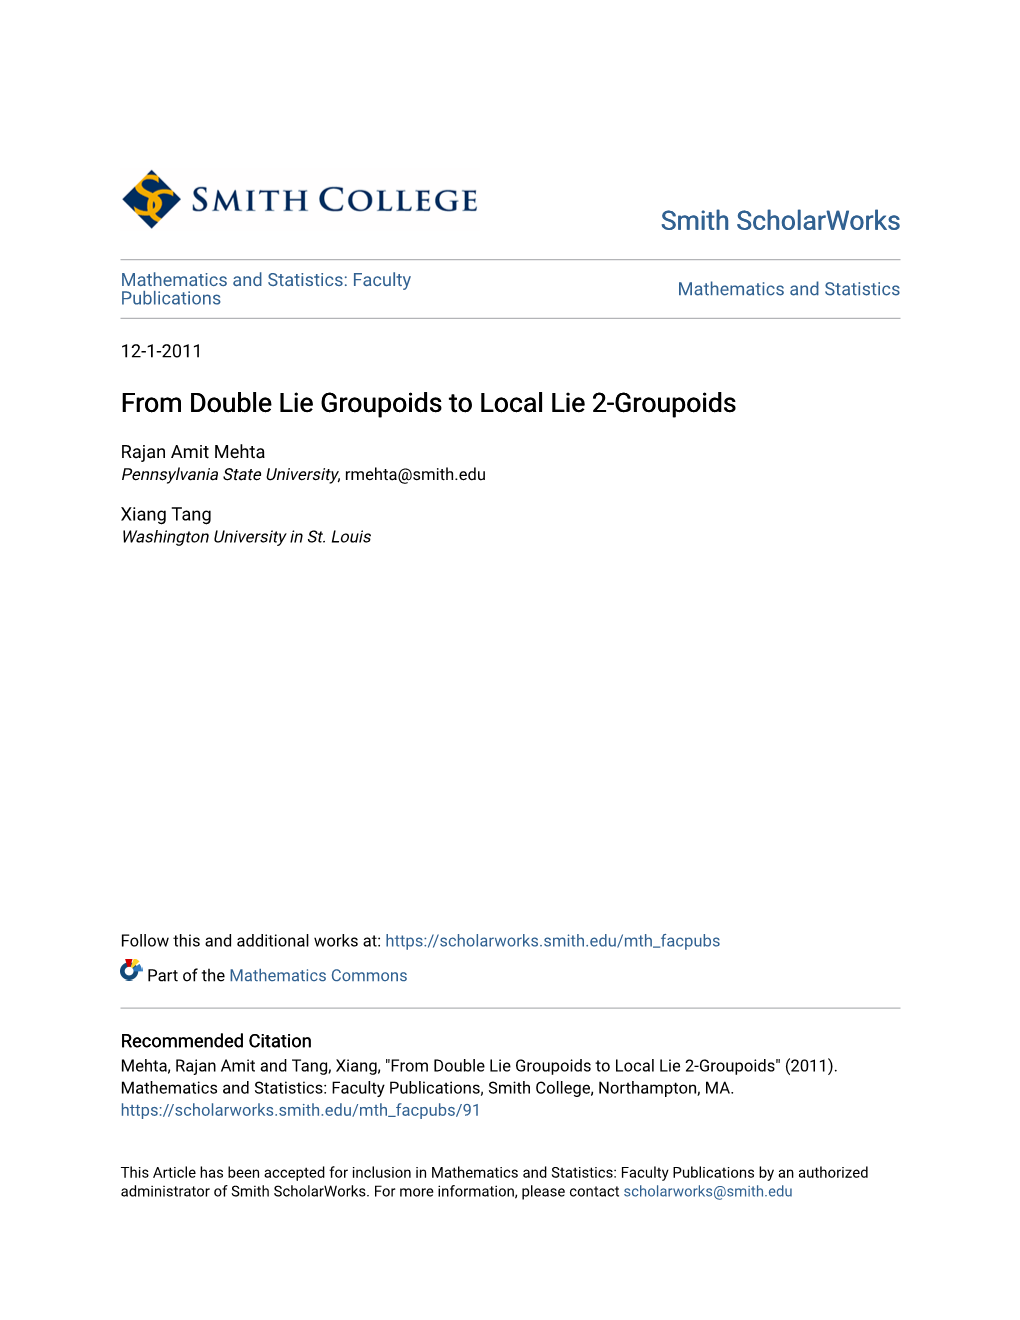 From Double Lie Groupoids to Local Lie 2-Groupoids